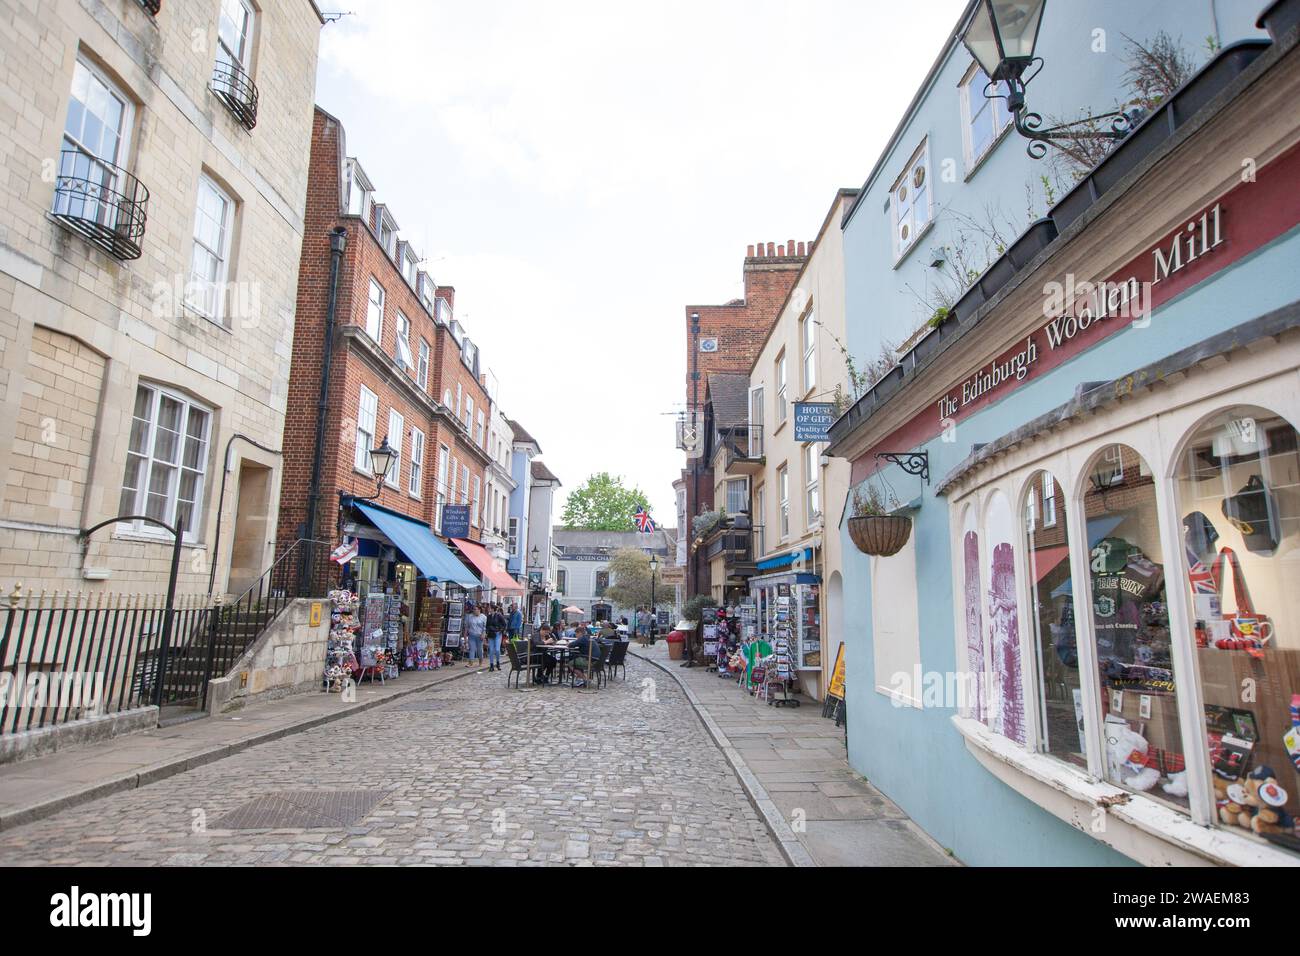 Shops and restaurants on Castle Hill in Windsor, Berkshire in the UK Stock Photo